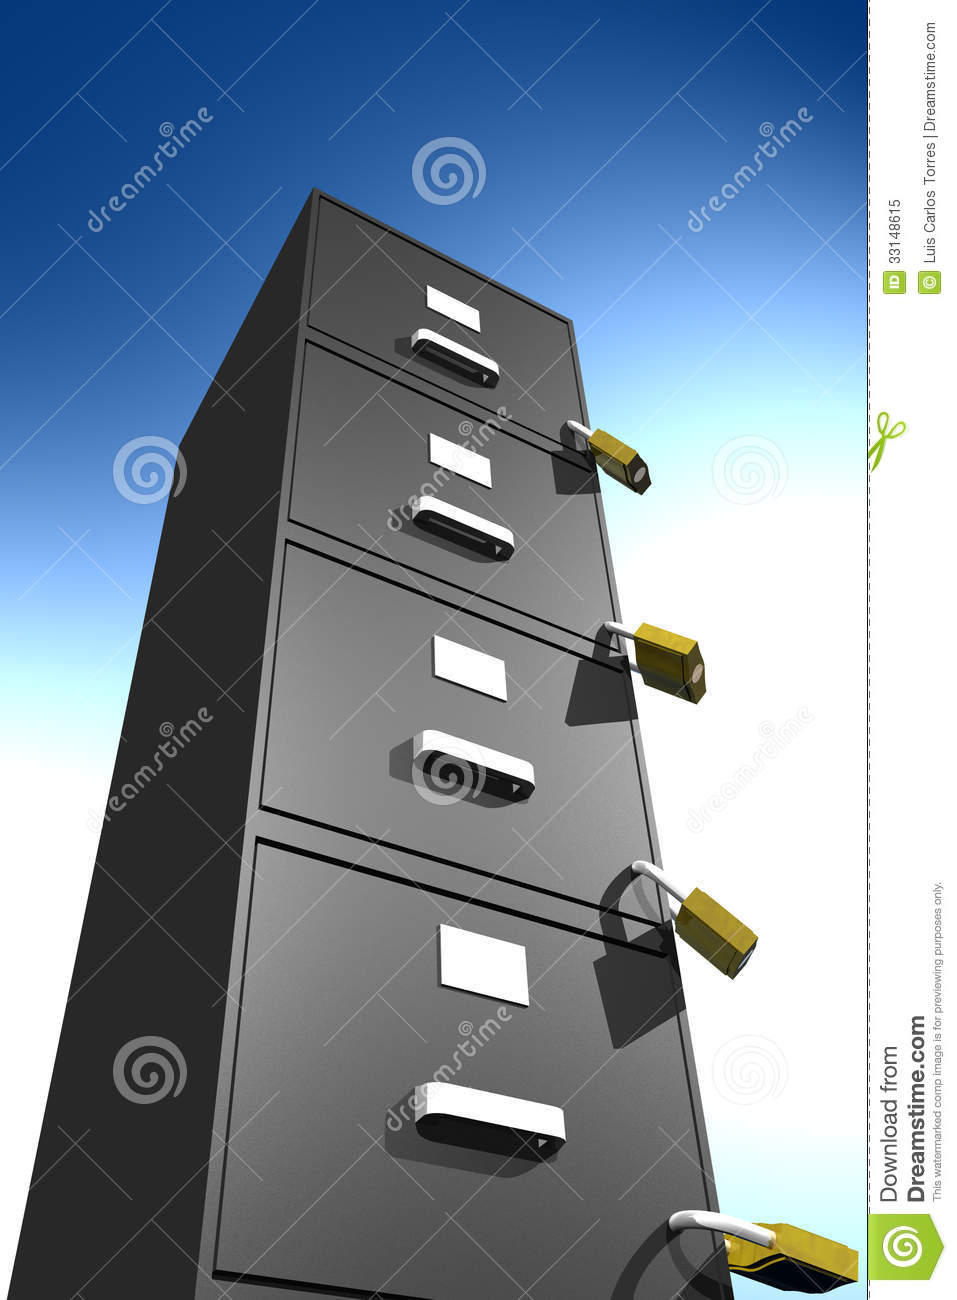 Locked File Cabinet  3d  Royalty Free Stock Photo   Image  33148615